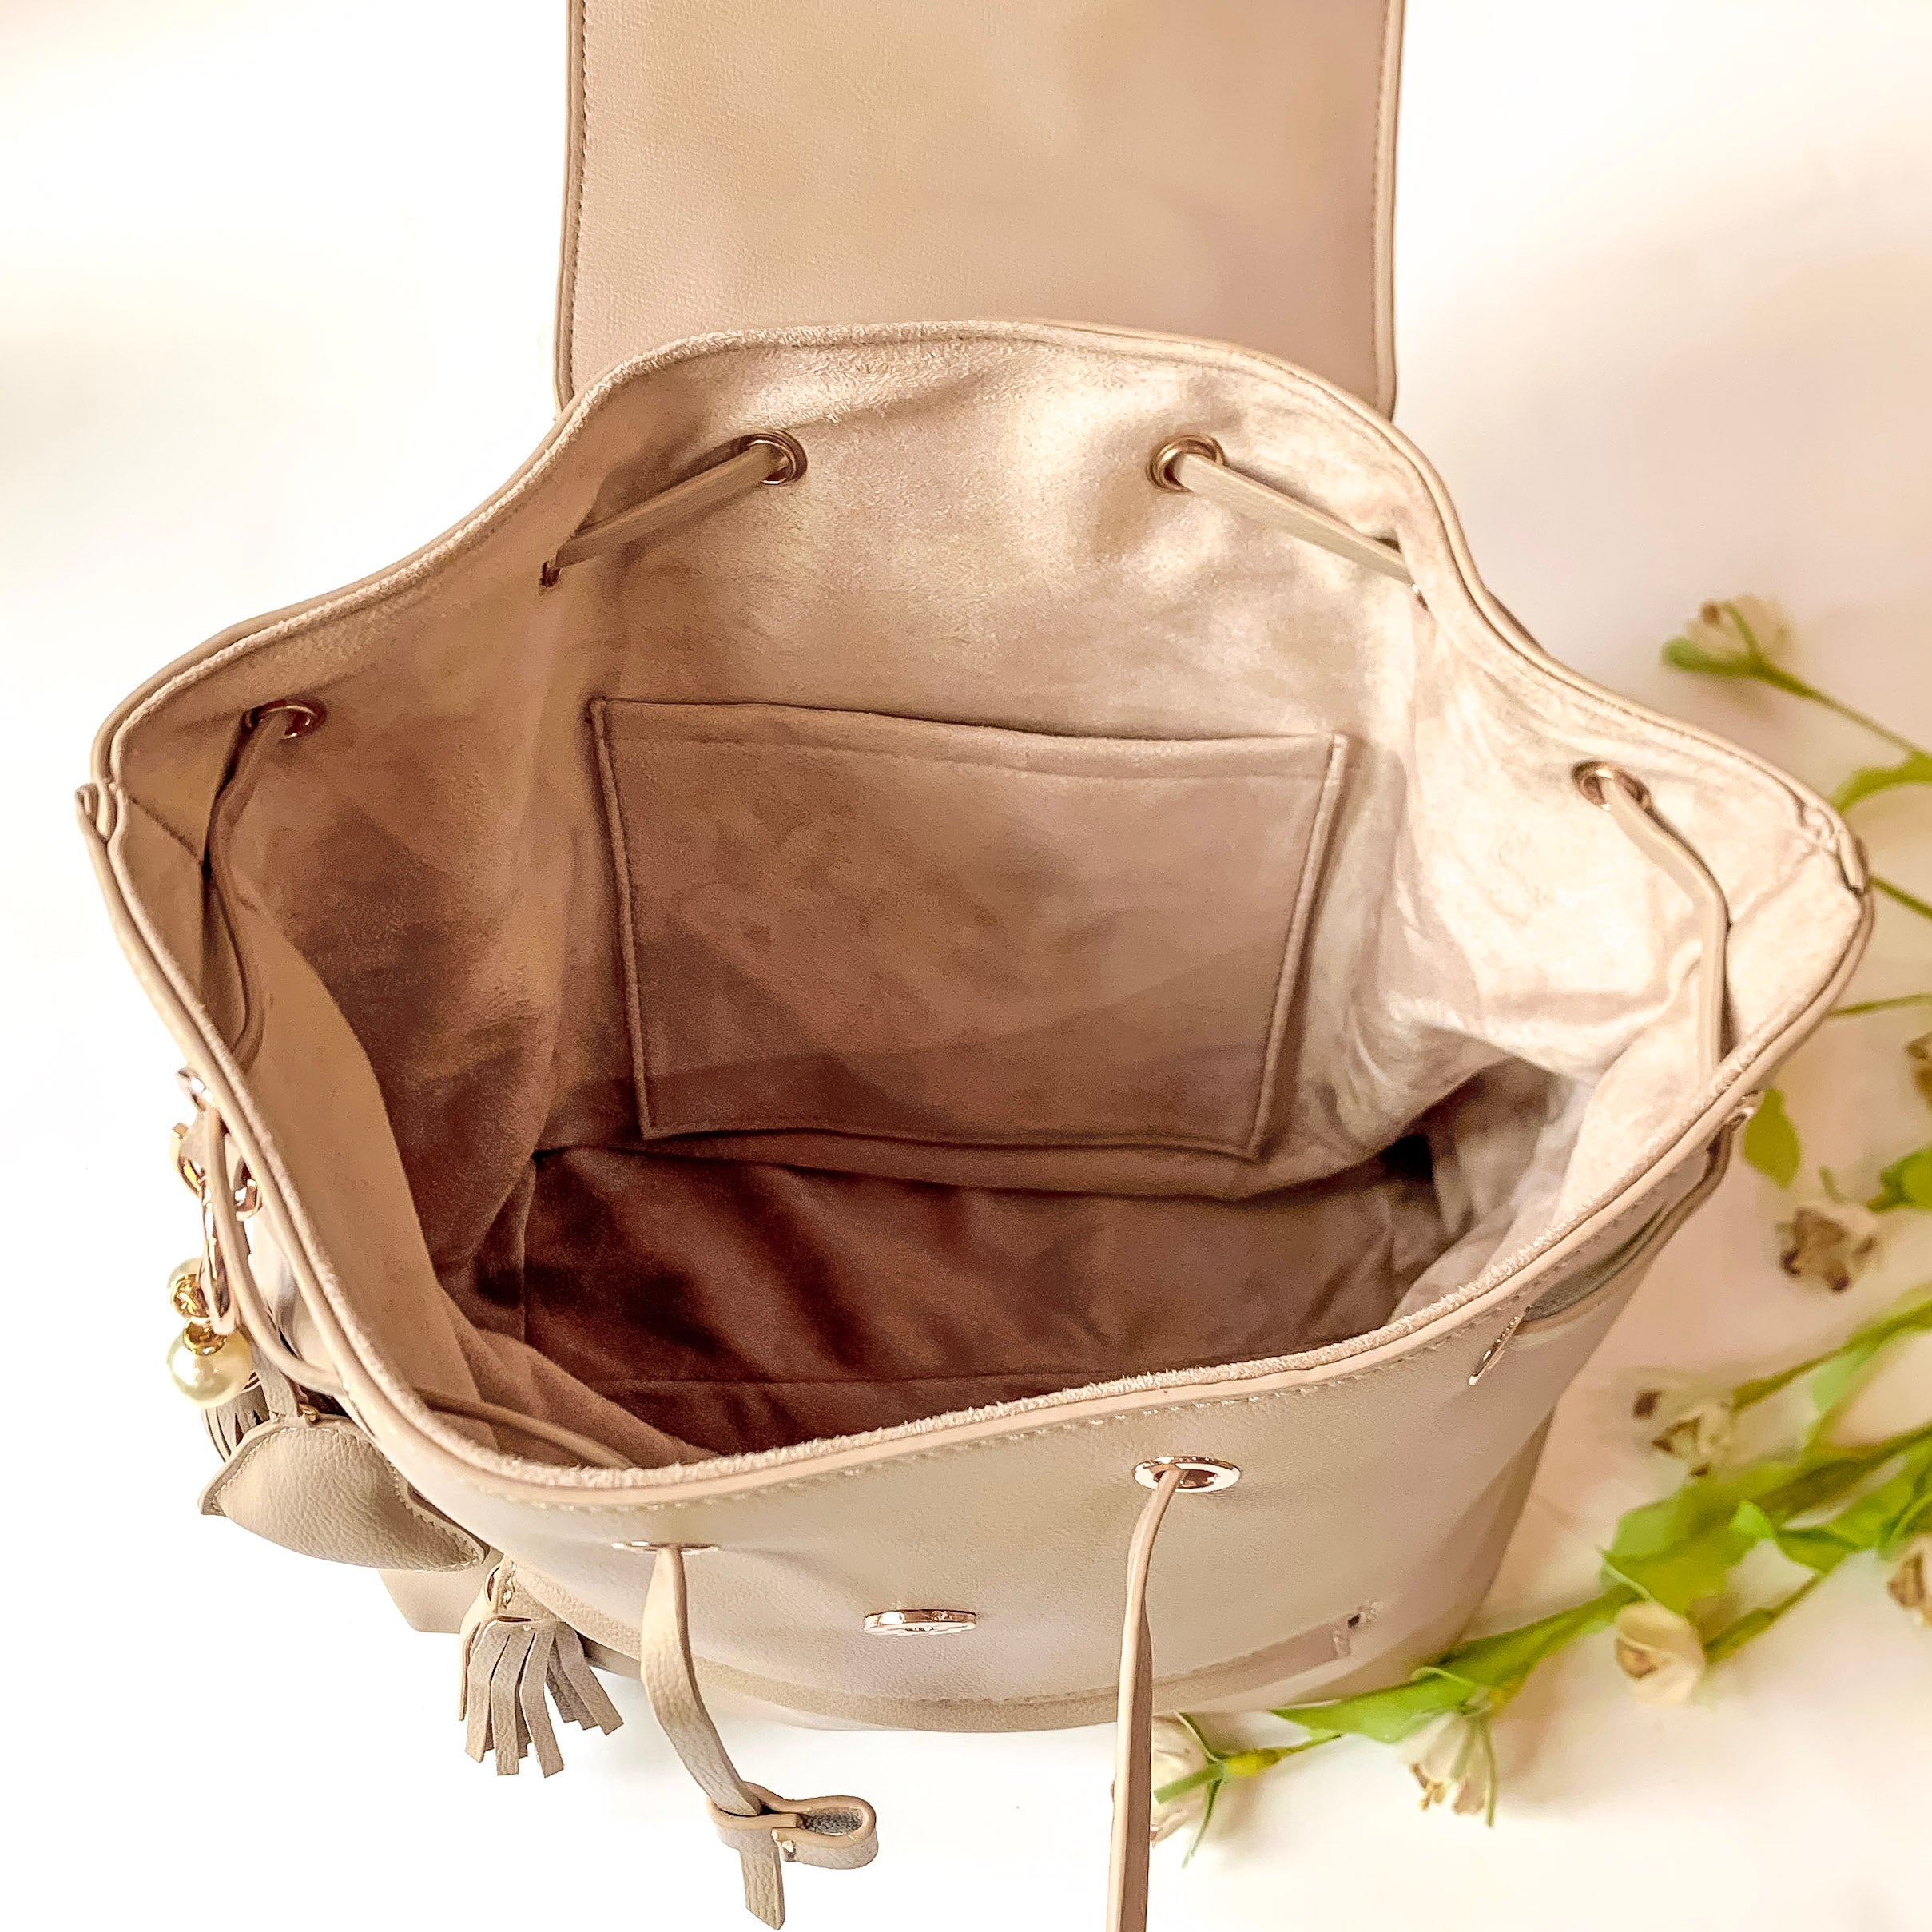 Hollis | Mini Backpack in Nude - Giddy Up Glamour Boutique